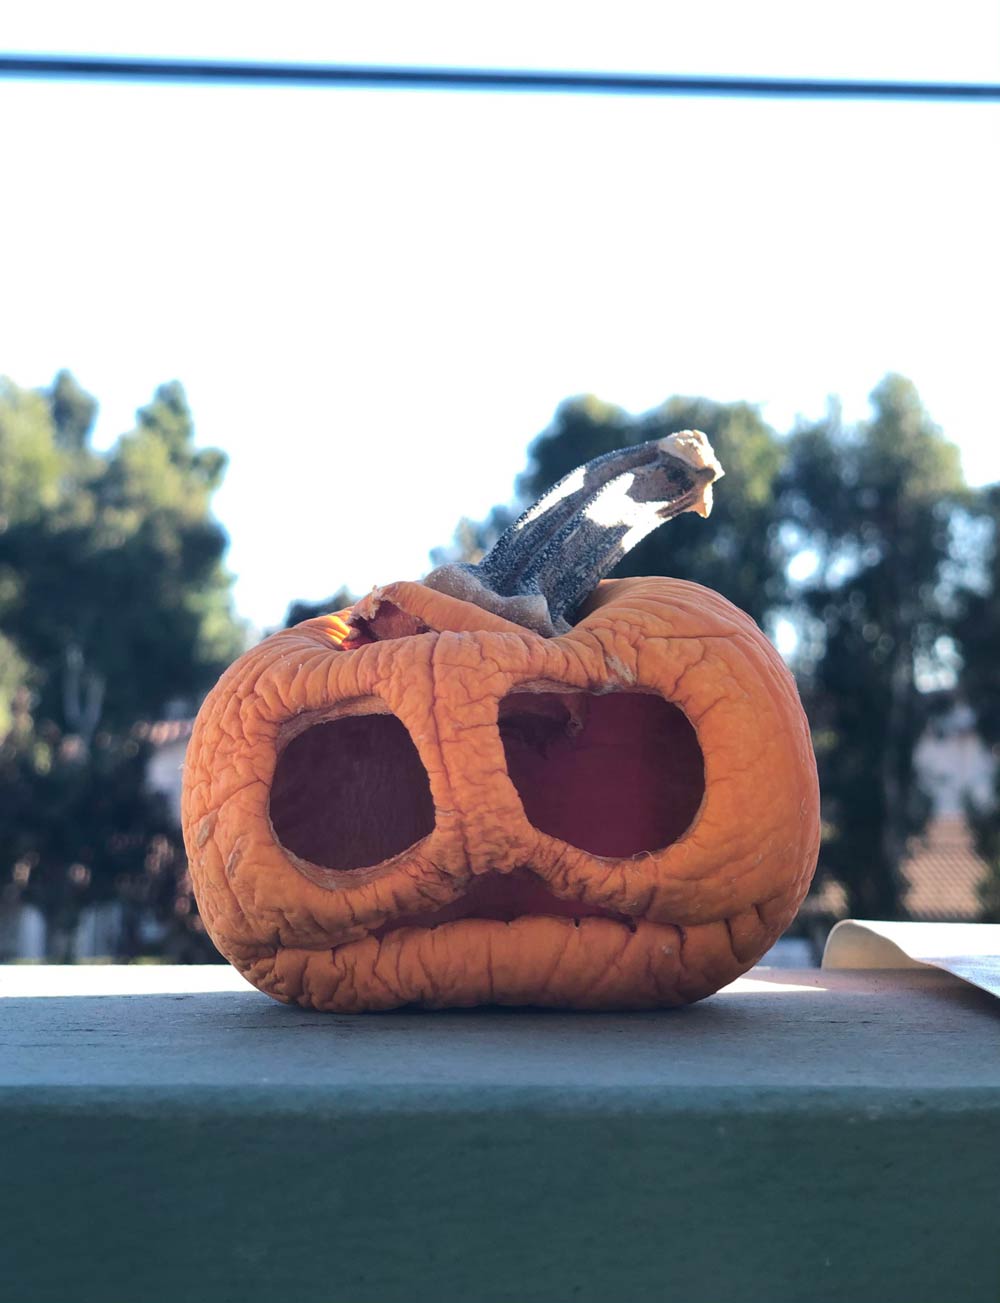 Too hot in SoCal for my pumpkin